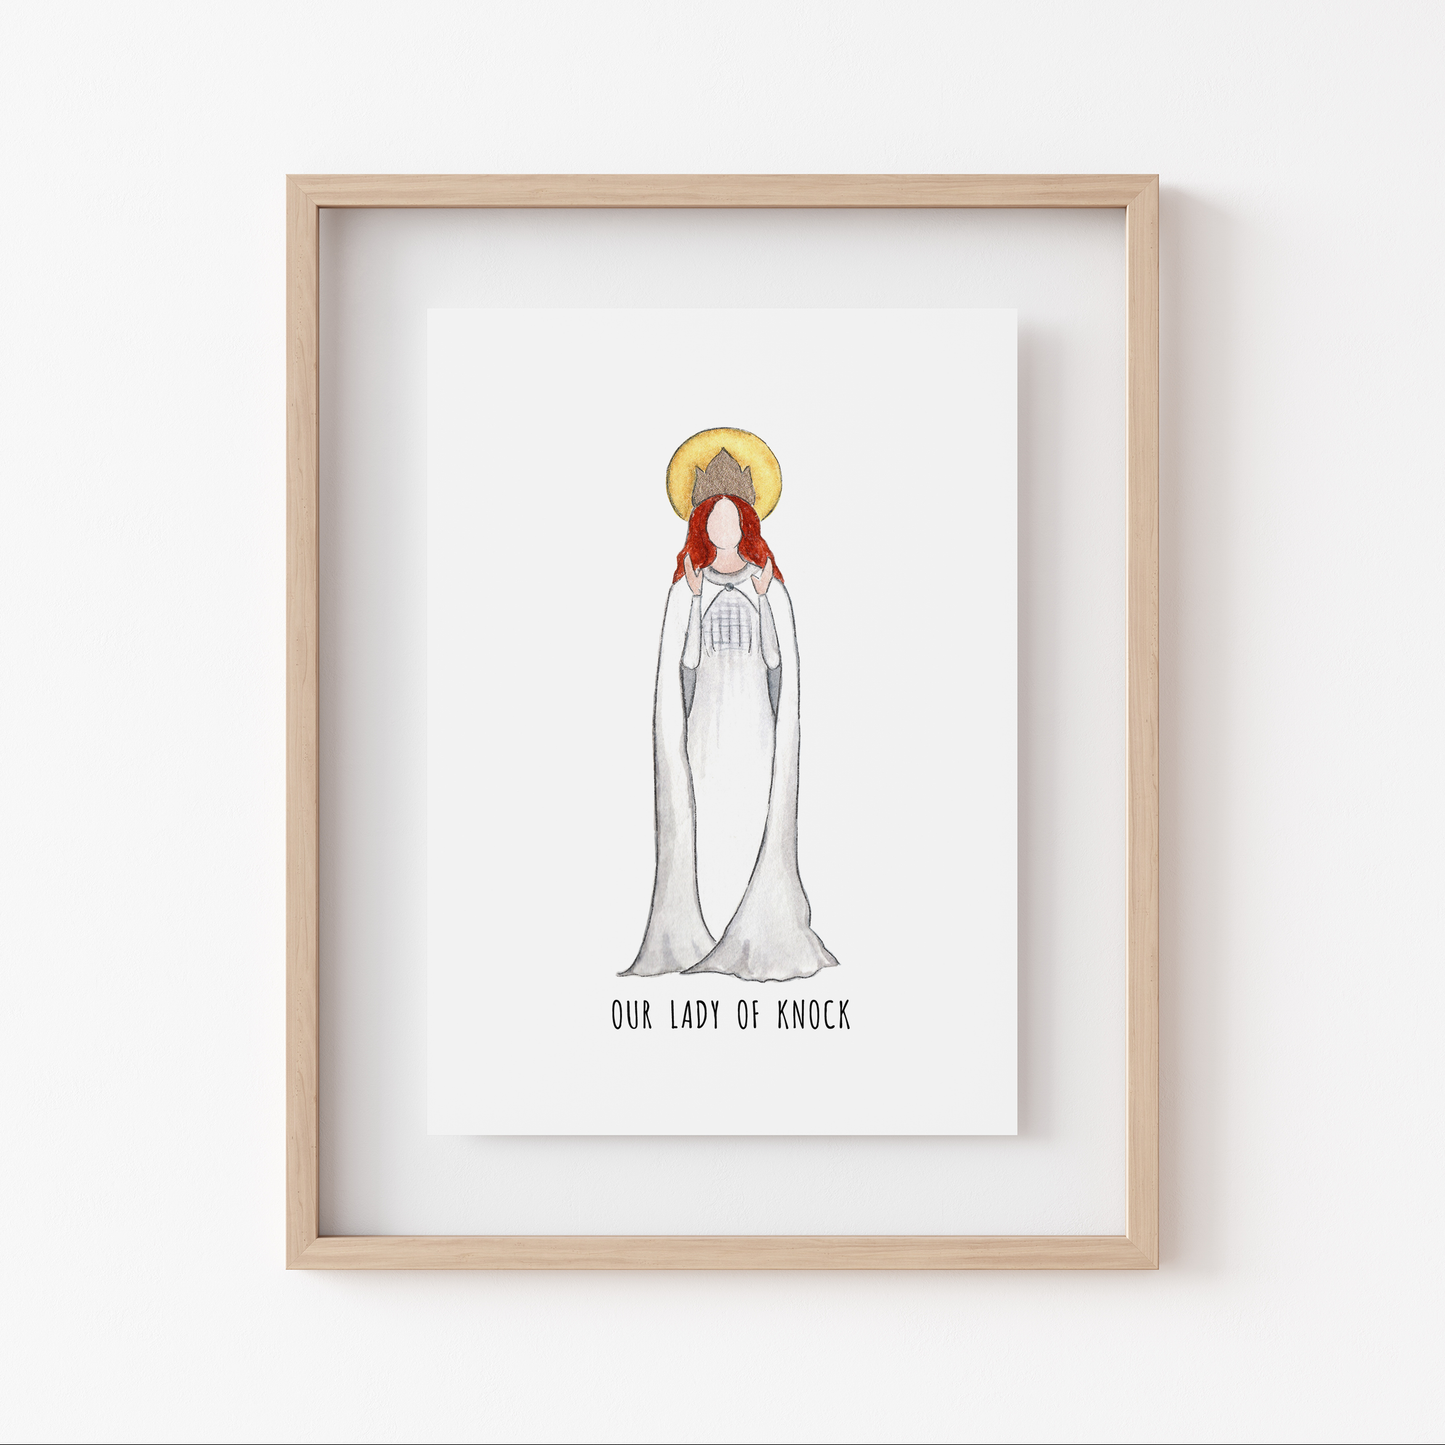 Marian Minis - Our Lady of Knock